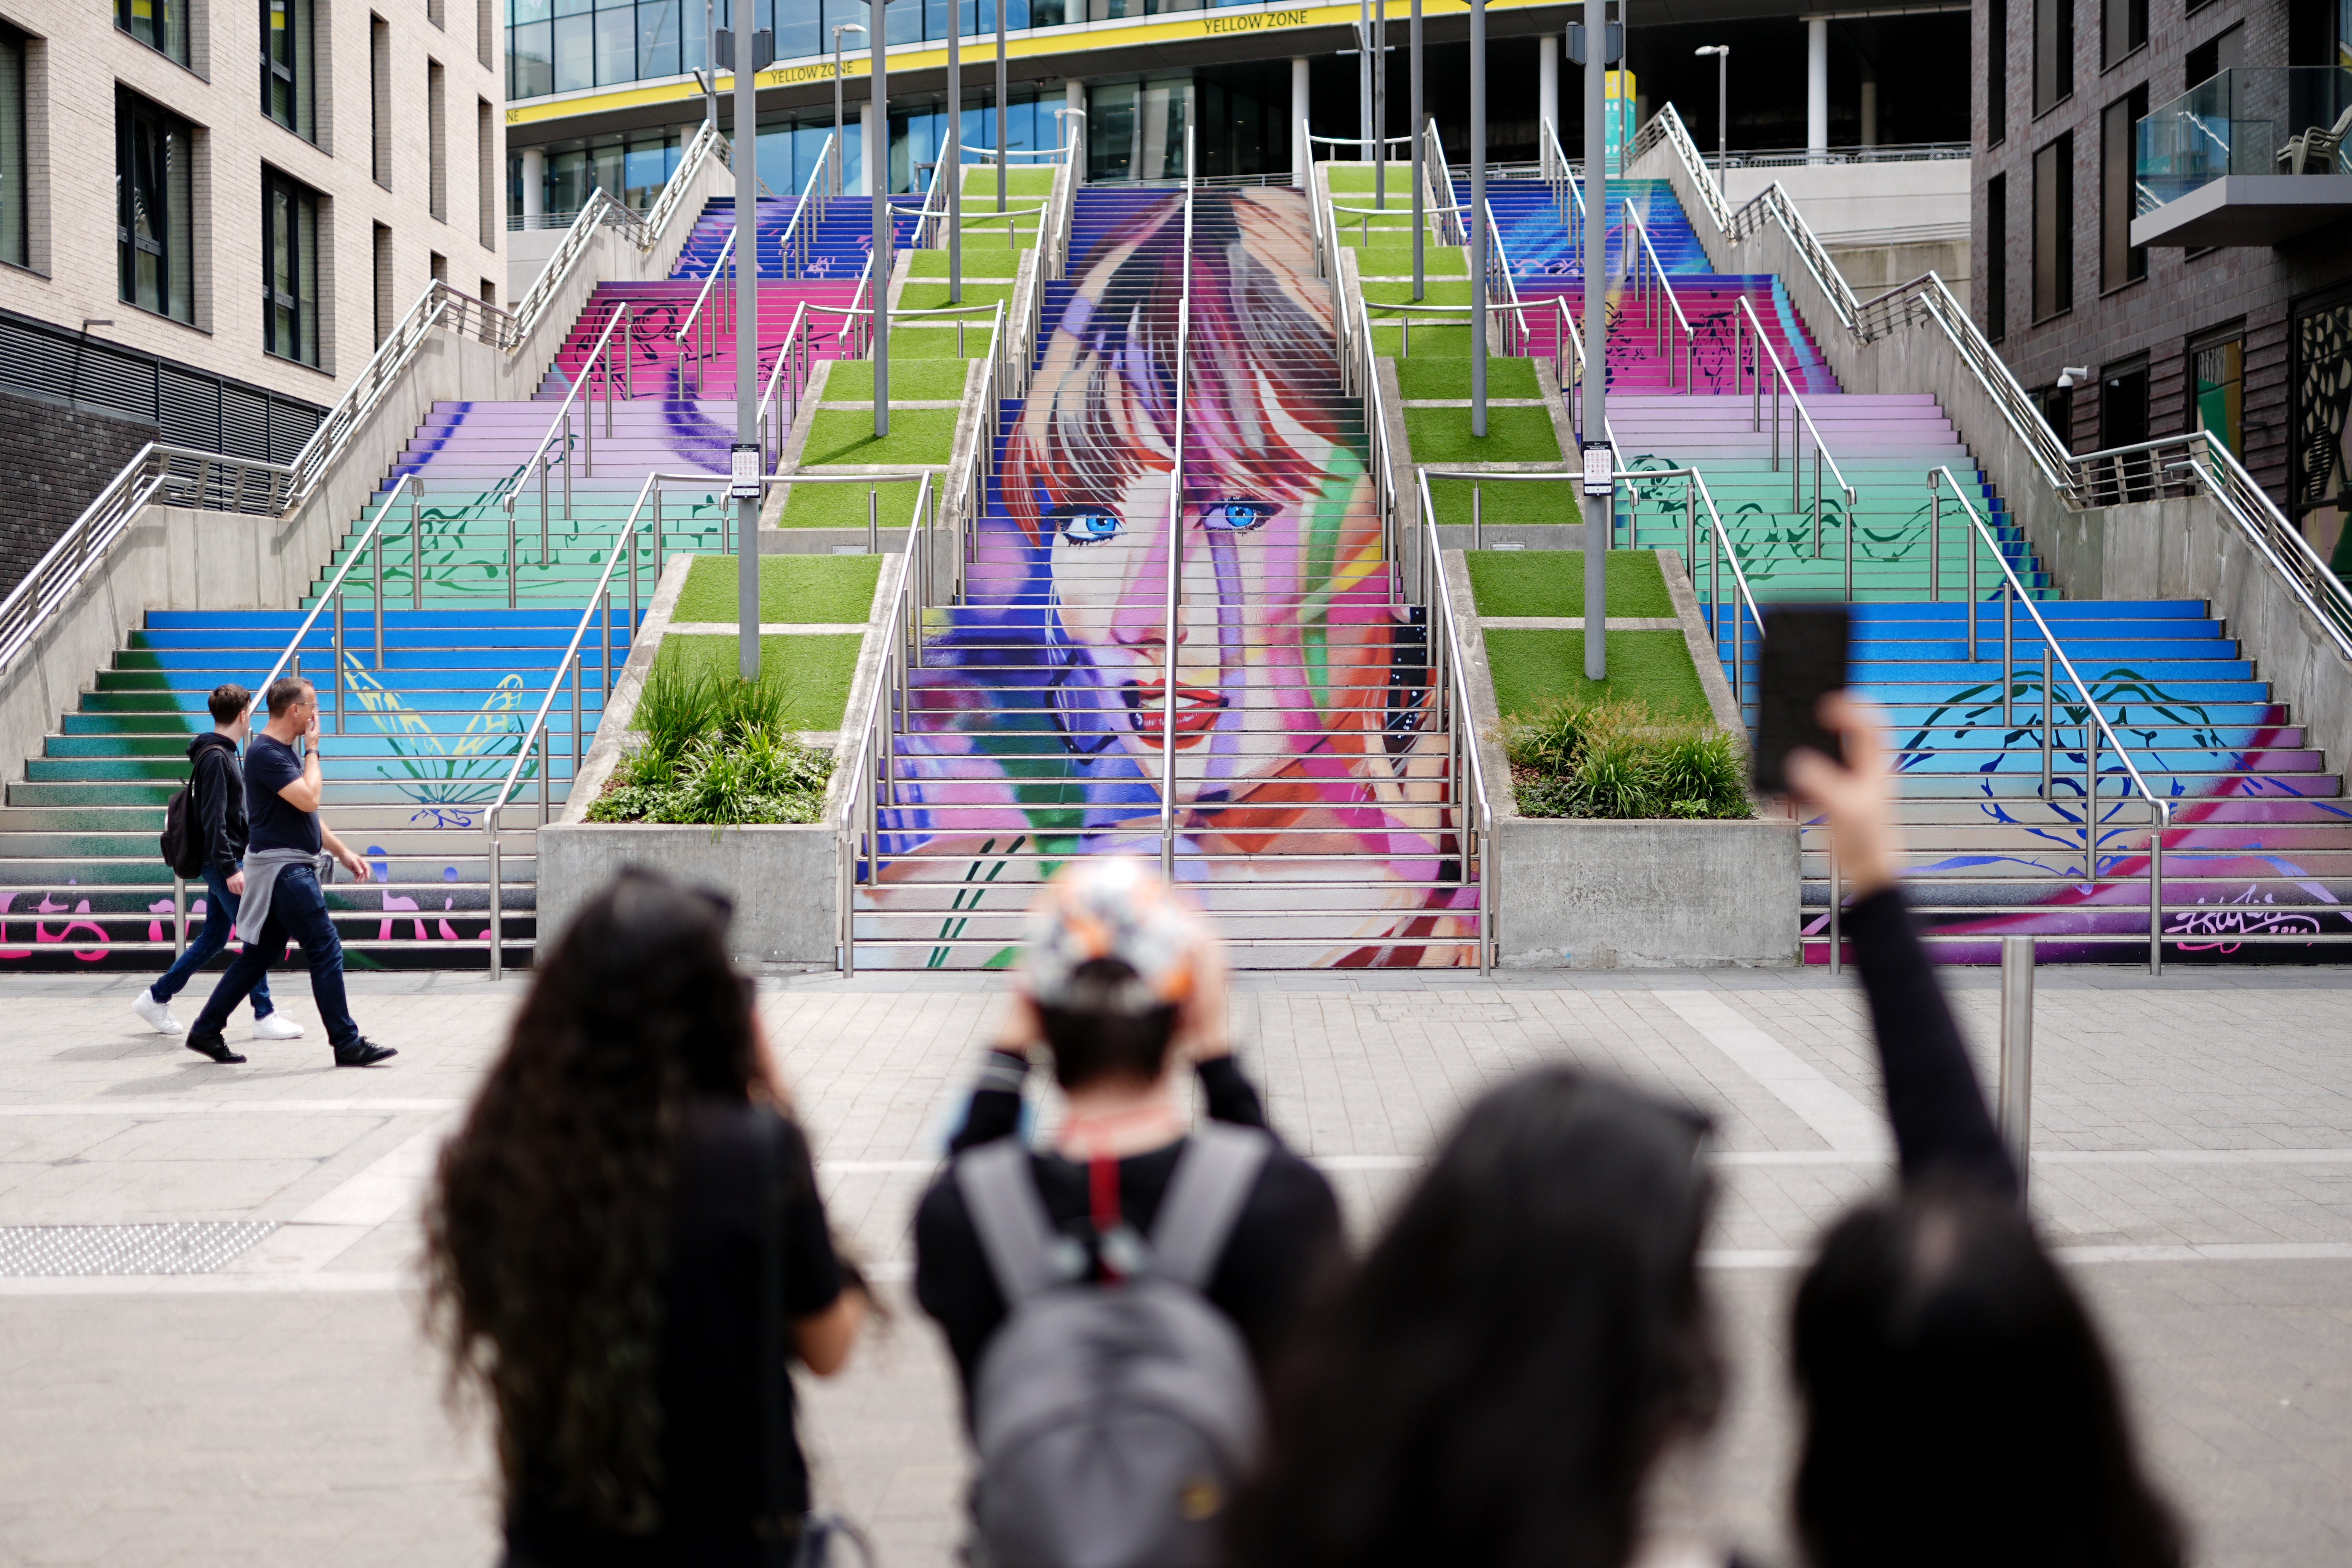 A mural of Taylor Swift outside Wembley Stadium in London in June. The ‘Swift lift’ is expected to have brought a boost to spending (Aaron Chown/PA)